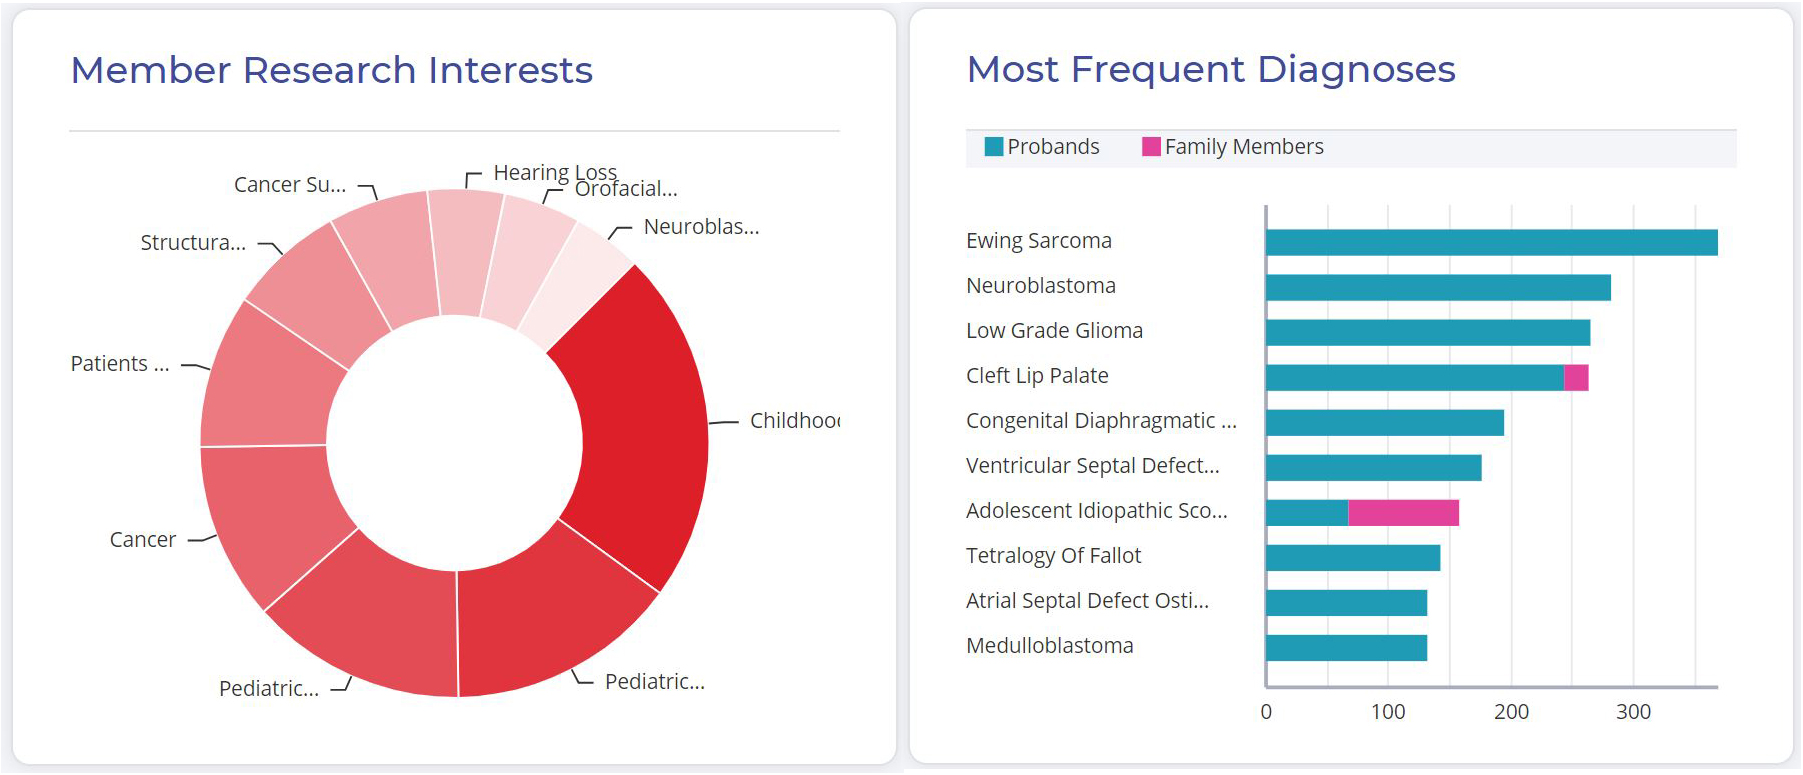 The left figure shows Member Research Interests in a circular chart. Each category is in a different shade of red. The topics must be scrolled over in the portal in order to read their full titles. The right figure shows Most Frequent Diagnoses. The chart shows probands in teal and family members in pink. On the left are the following disorders, listed in order of most frequent to less frequent (0 to 300 on the x-axis): Ewing Sarcoma, Neuroblastoma, Low Grade Glioma, Cleft Lip Palate, Congenital Diaphragmatic…, Ventricular Septal Defect…, Adolescent Idoipathic Sco…, Tetralogy of Fallot, Atrial Septal Defect…, Medulloblastoma.